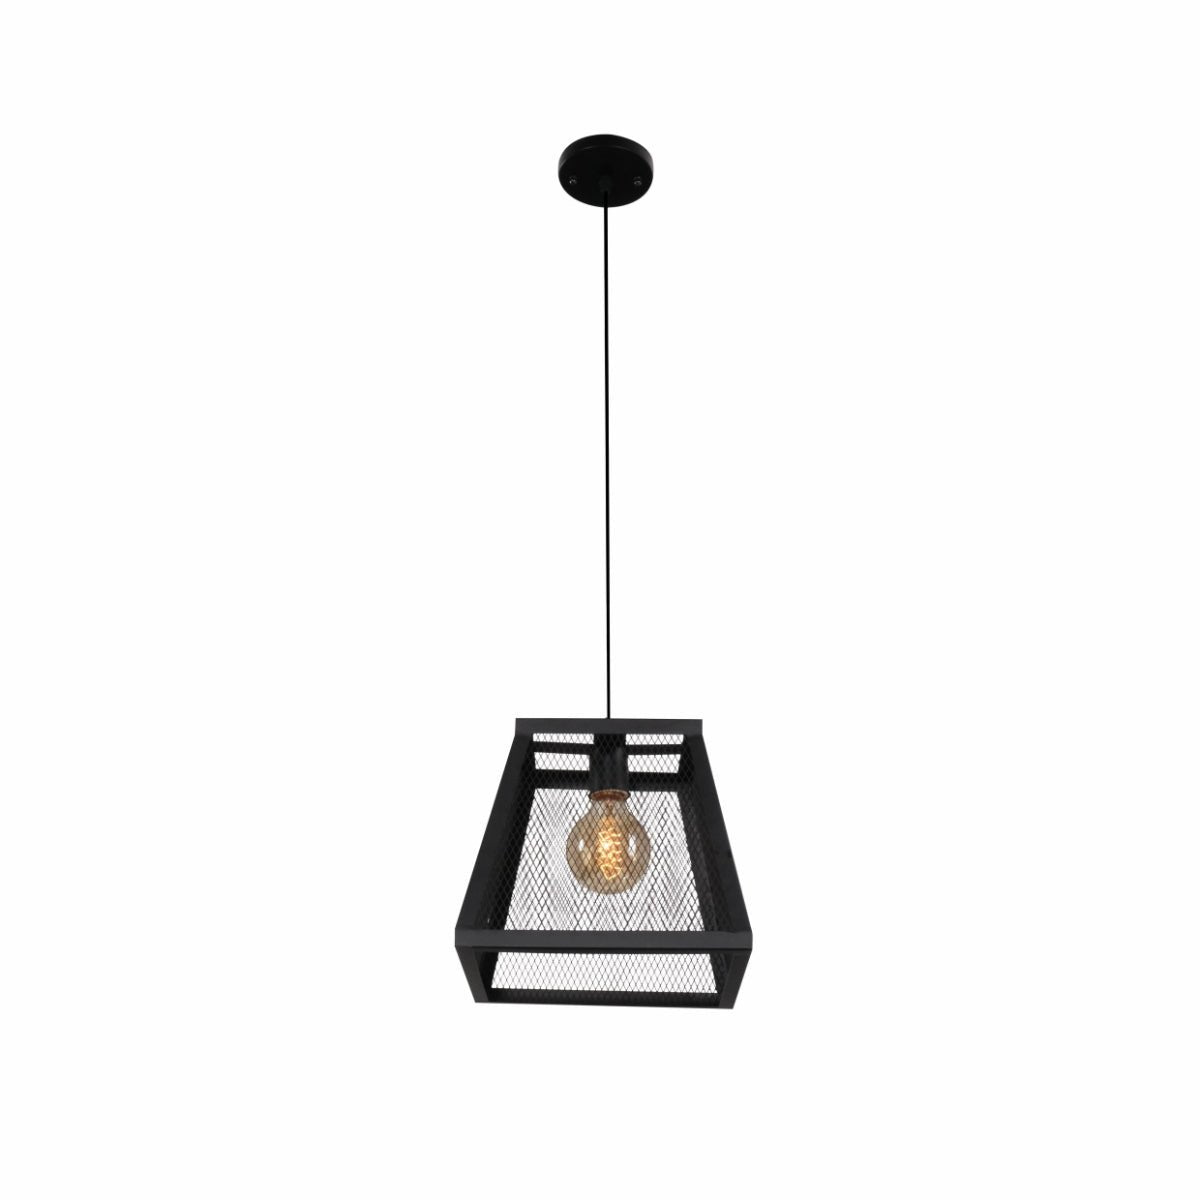 Main image of Black Metal Cuboid Caged Pendant Ceiling Light with E27 | TEKLED 150-17856